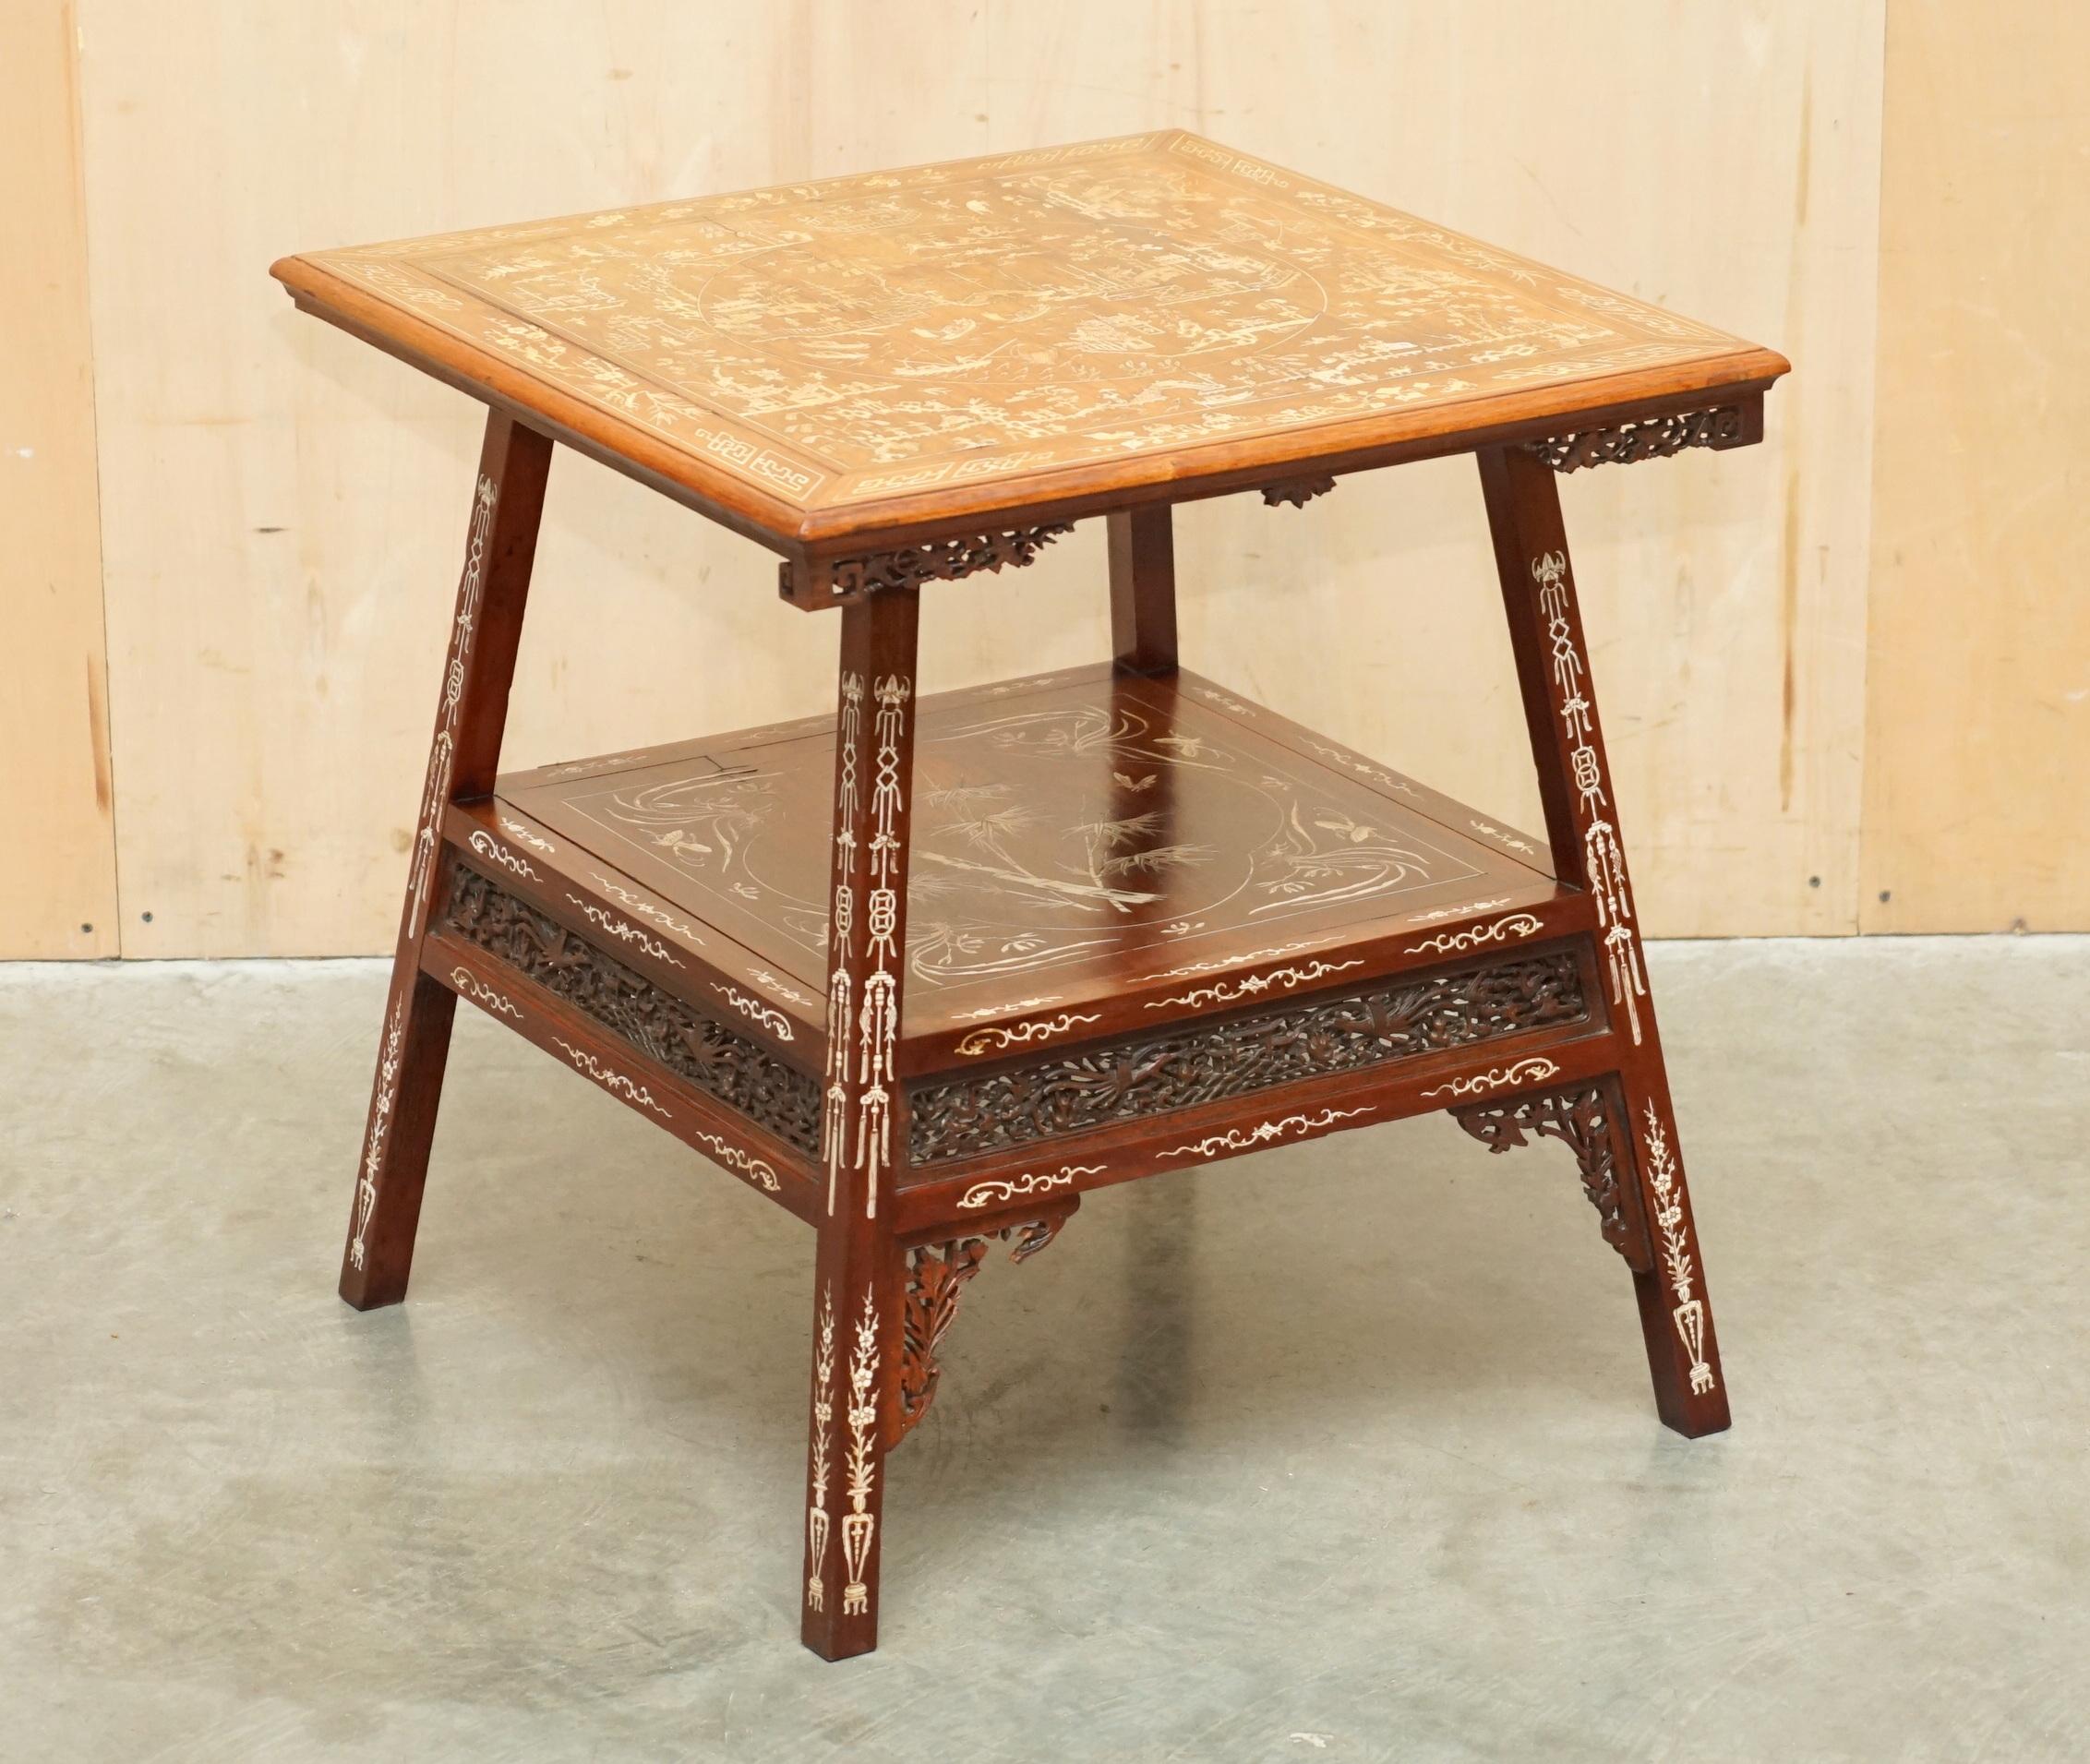 Royal House Antiques

Royal House Antiques is delighted to offer for sale this absolutely exquisite hand carved and ornately inlaid centre occasional table made in China Circa 1900-1920

Please note the delivery fee listed is just a guide, it covers